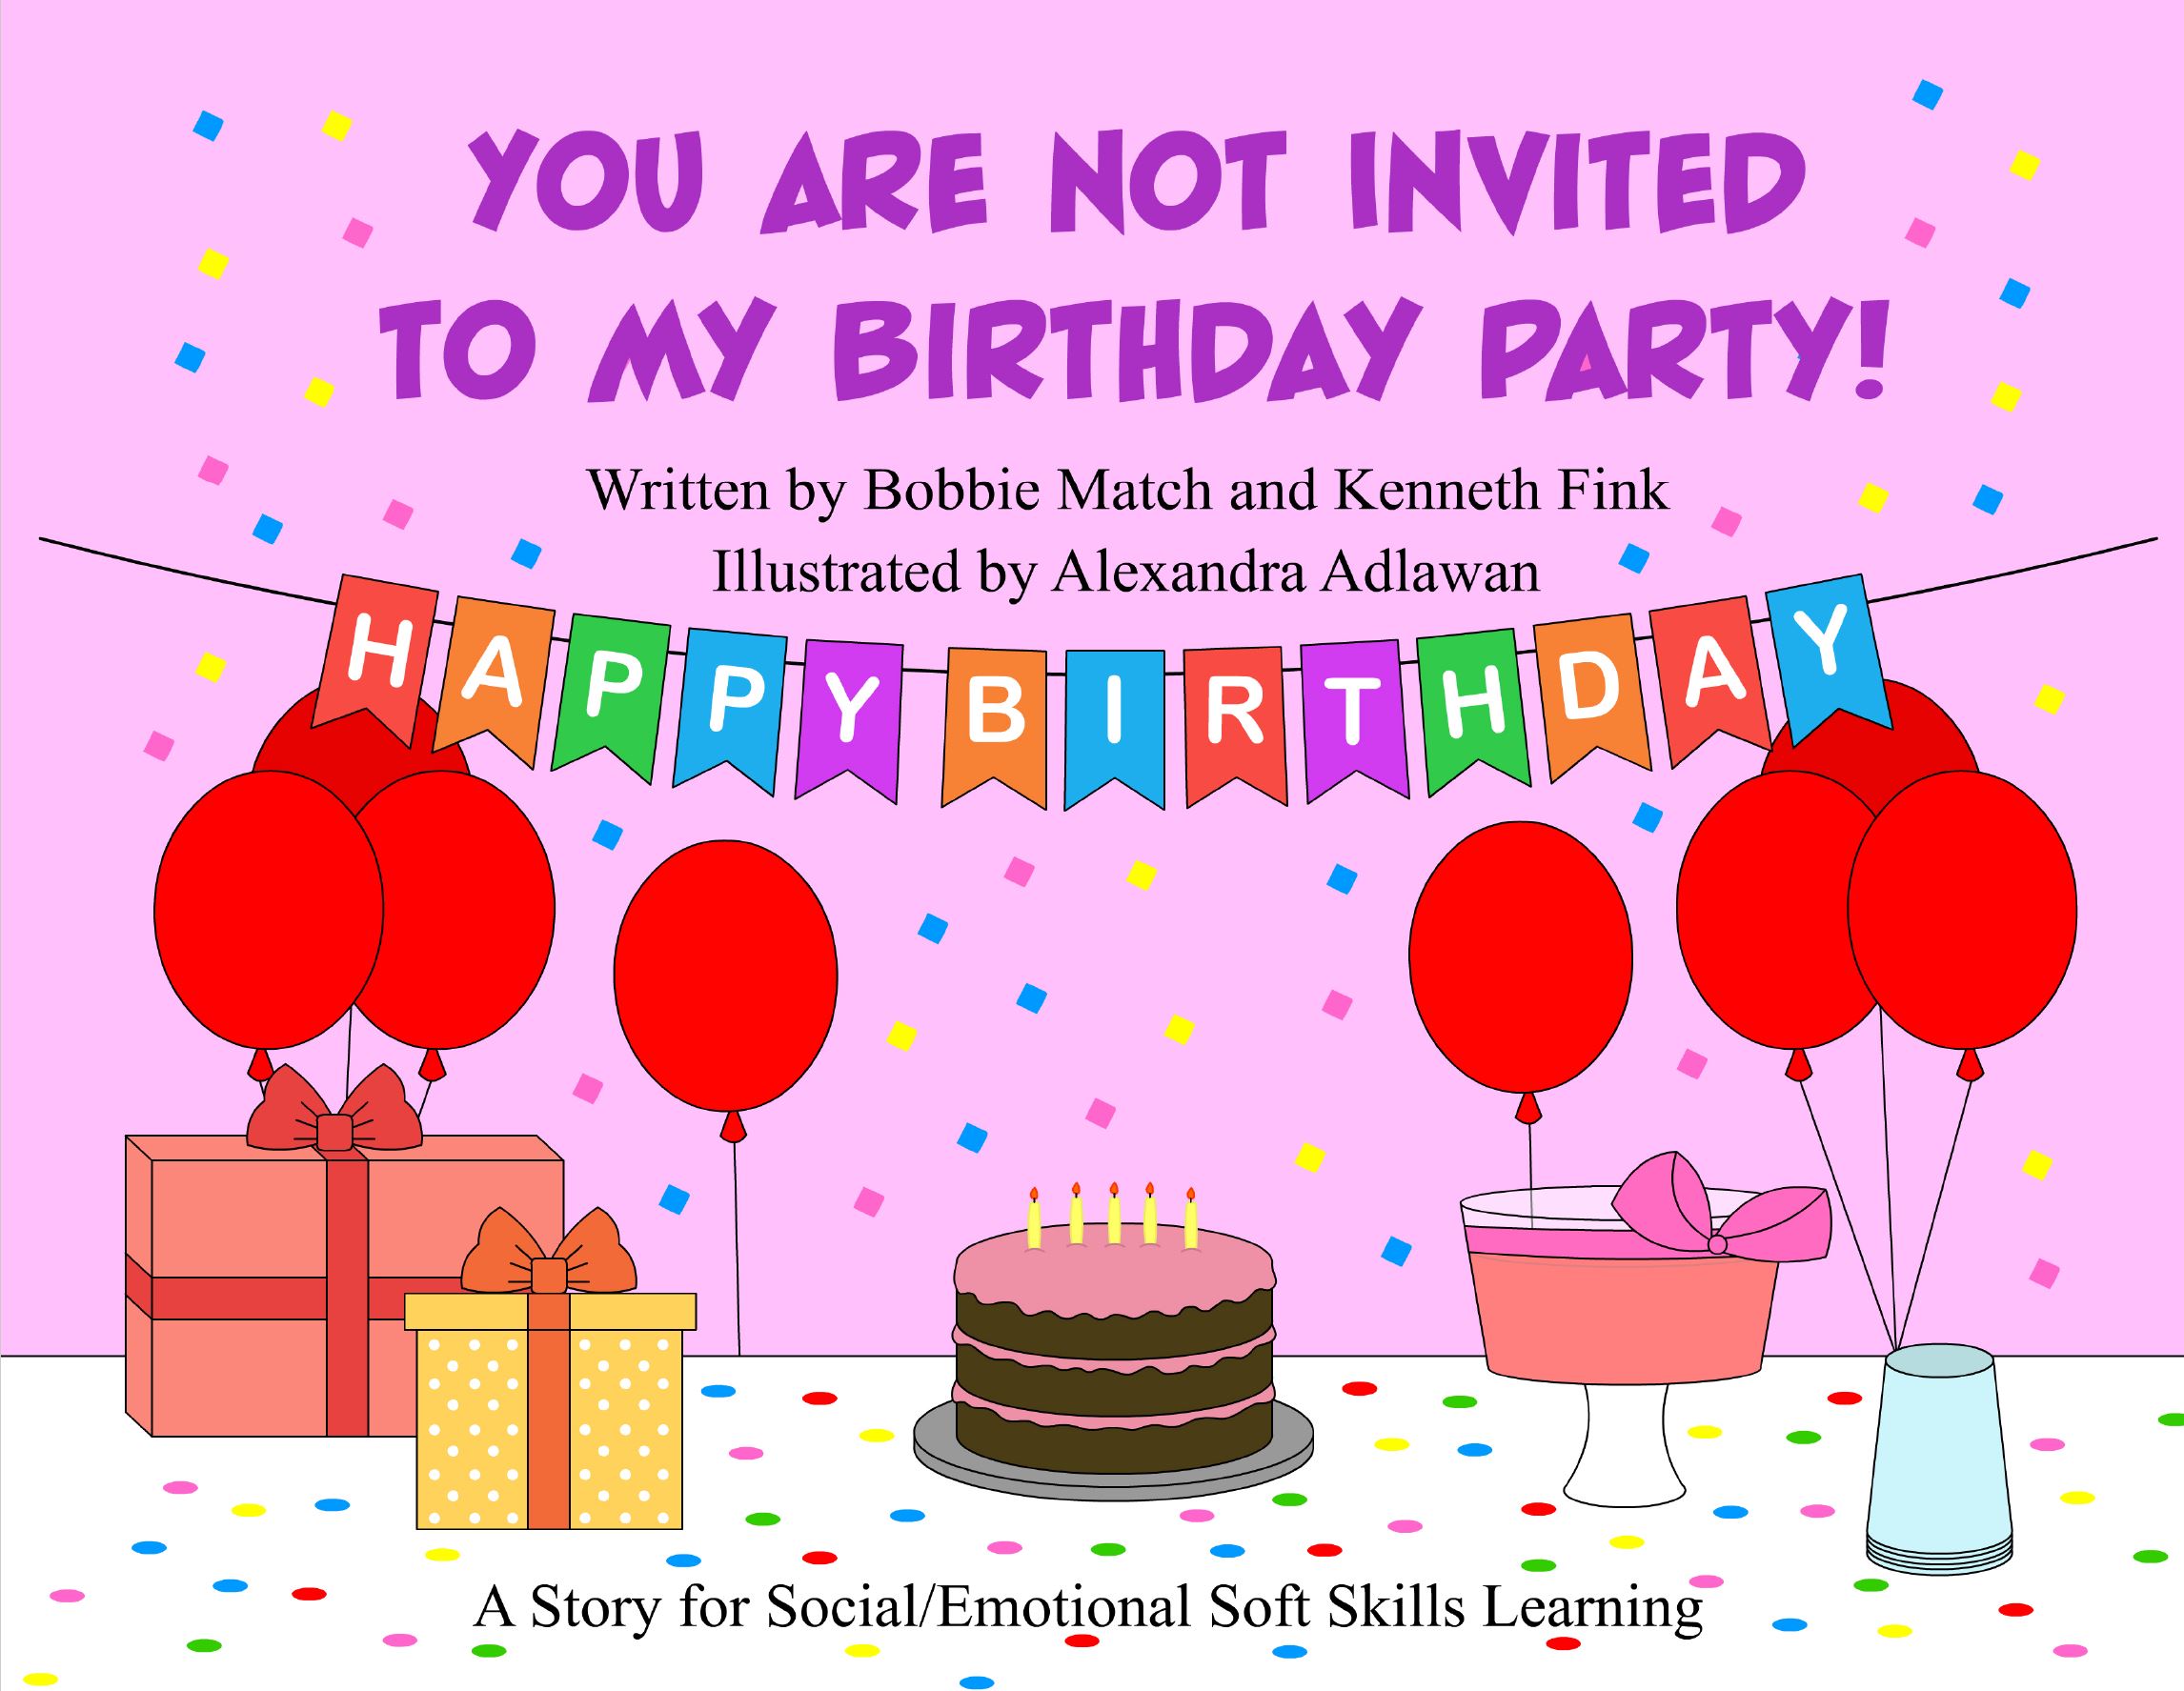 You're not invited to MY birthday party!